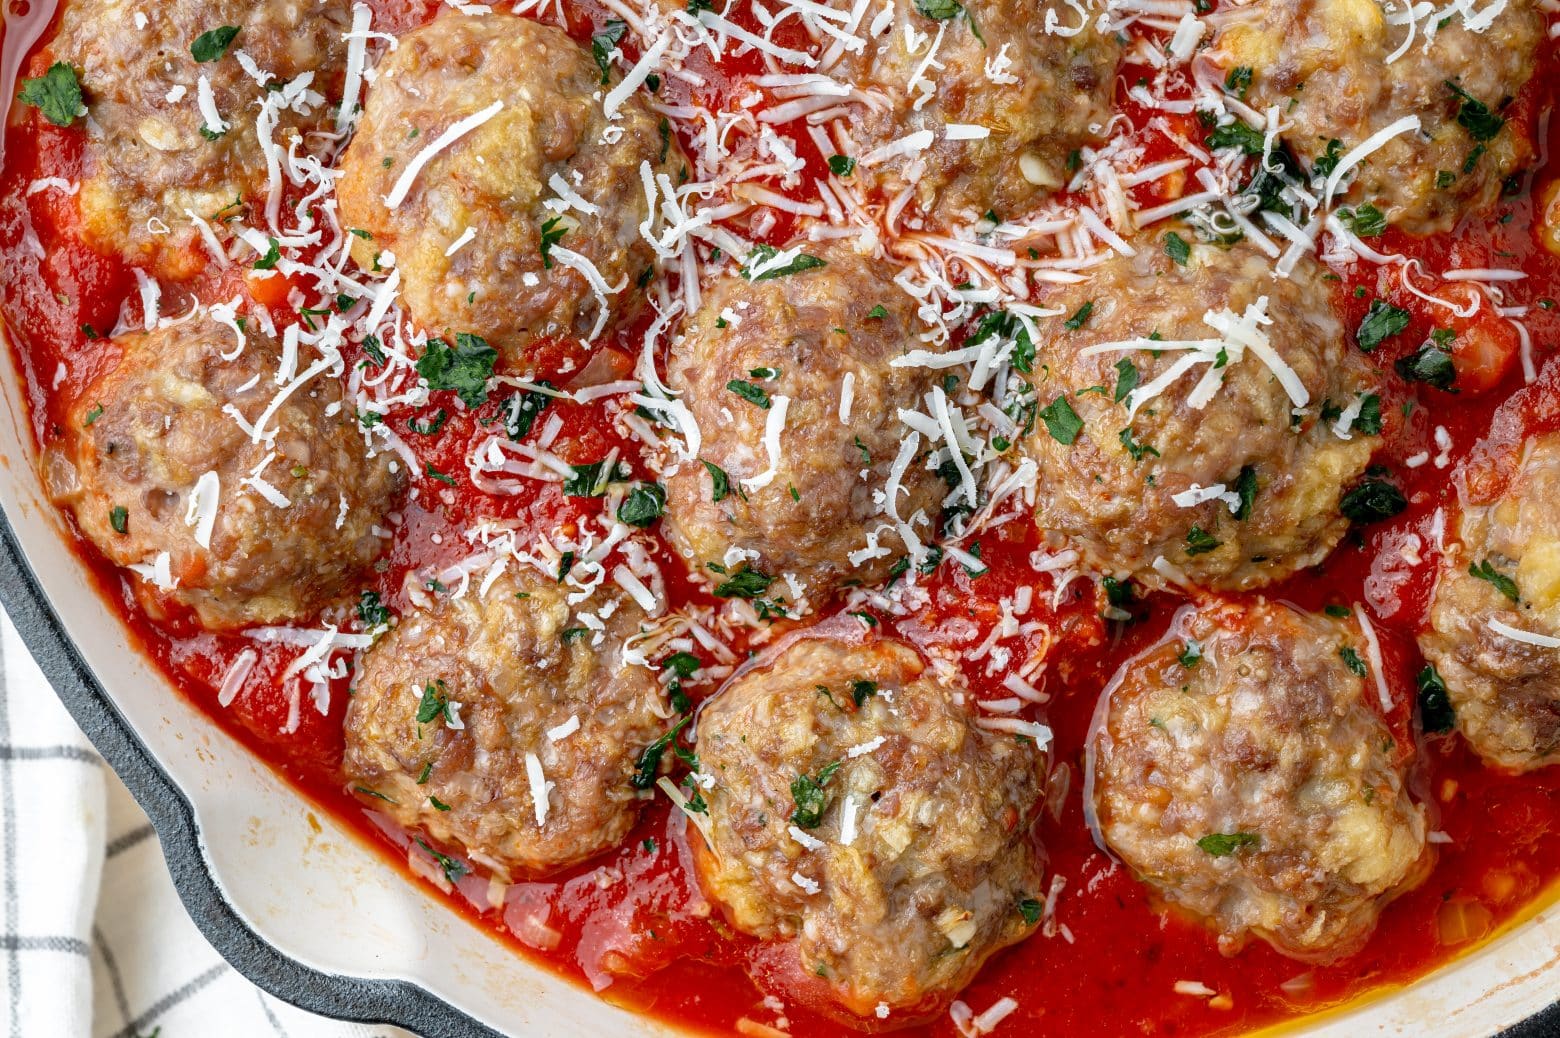  Meatball Master: Home & Kitchen